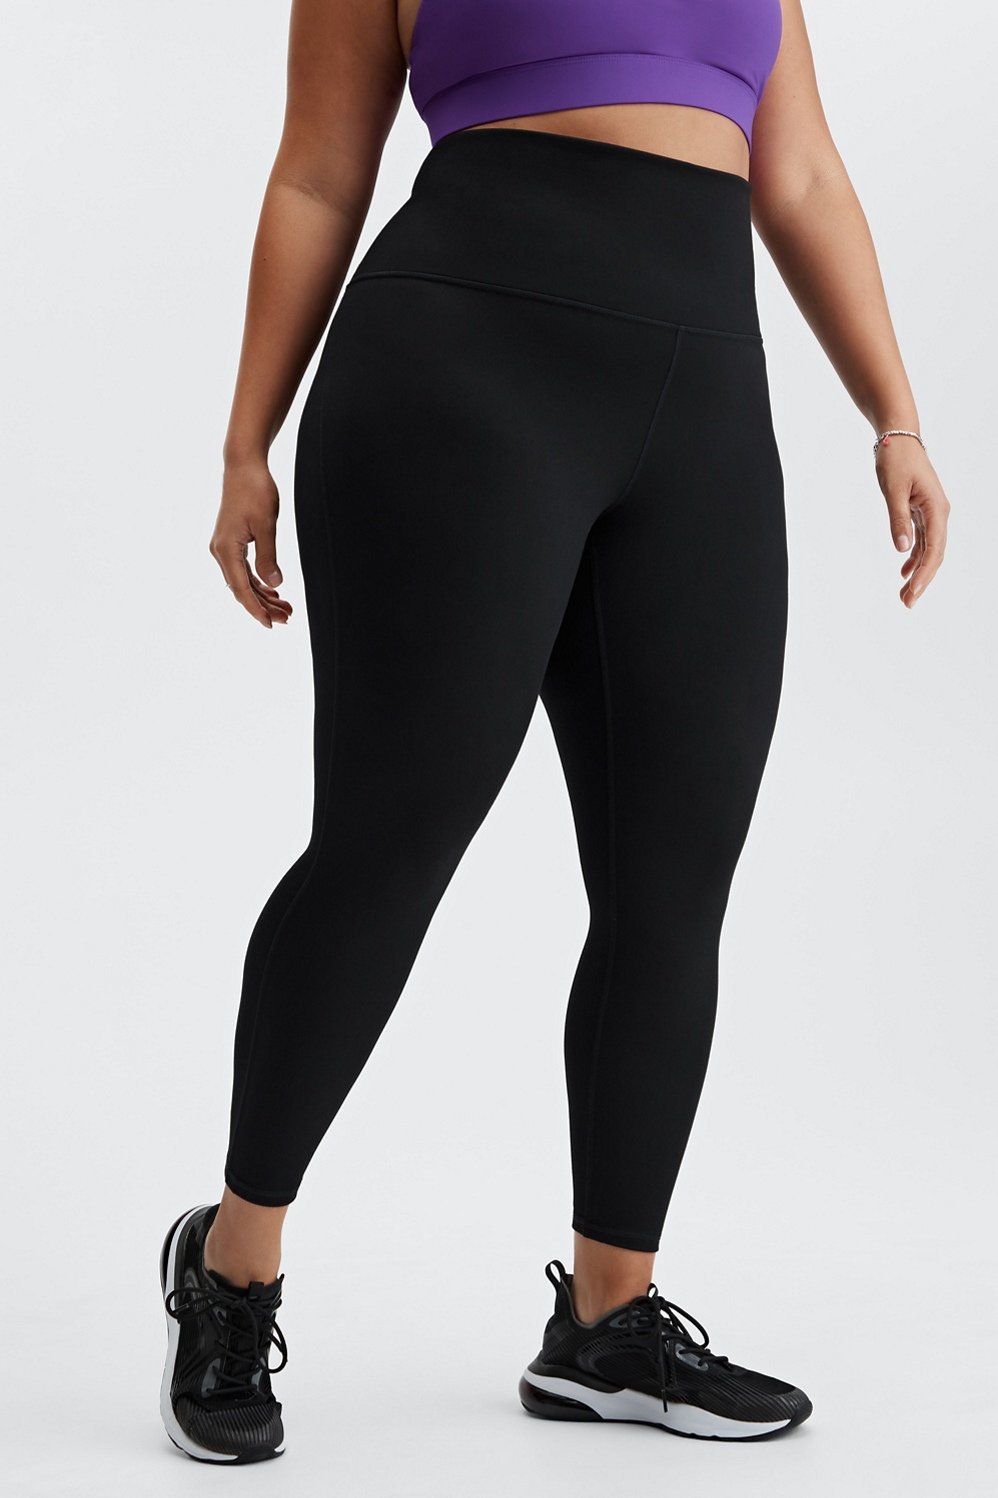 Adidas Women's climalite cropped leggings size Small Black - $9 - From erica